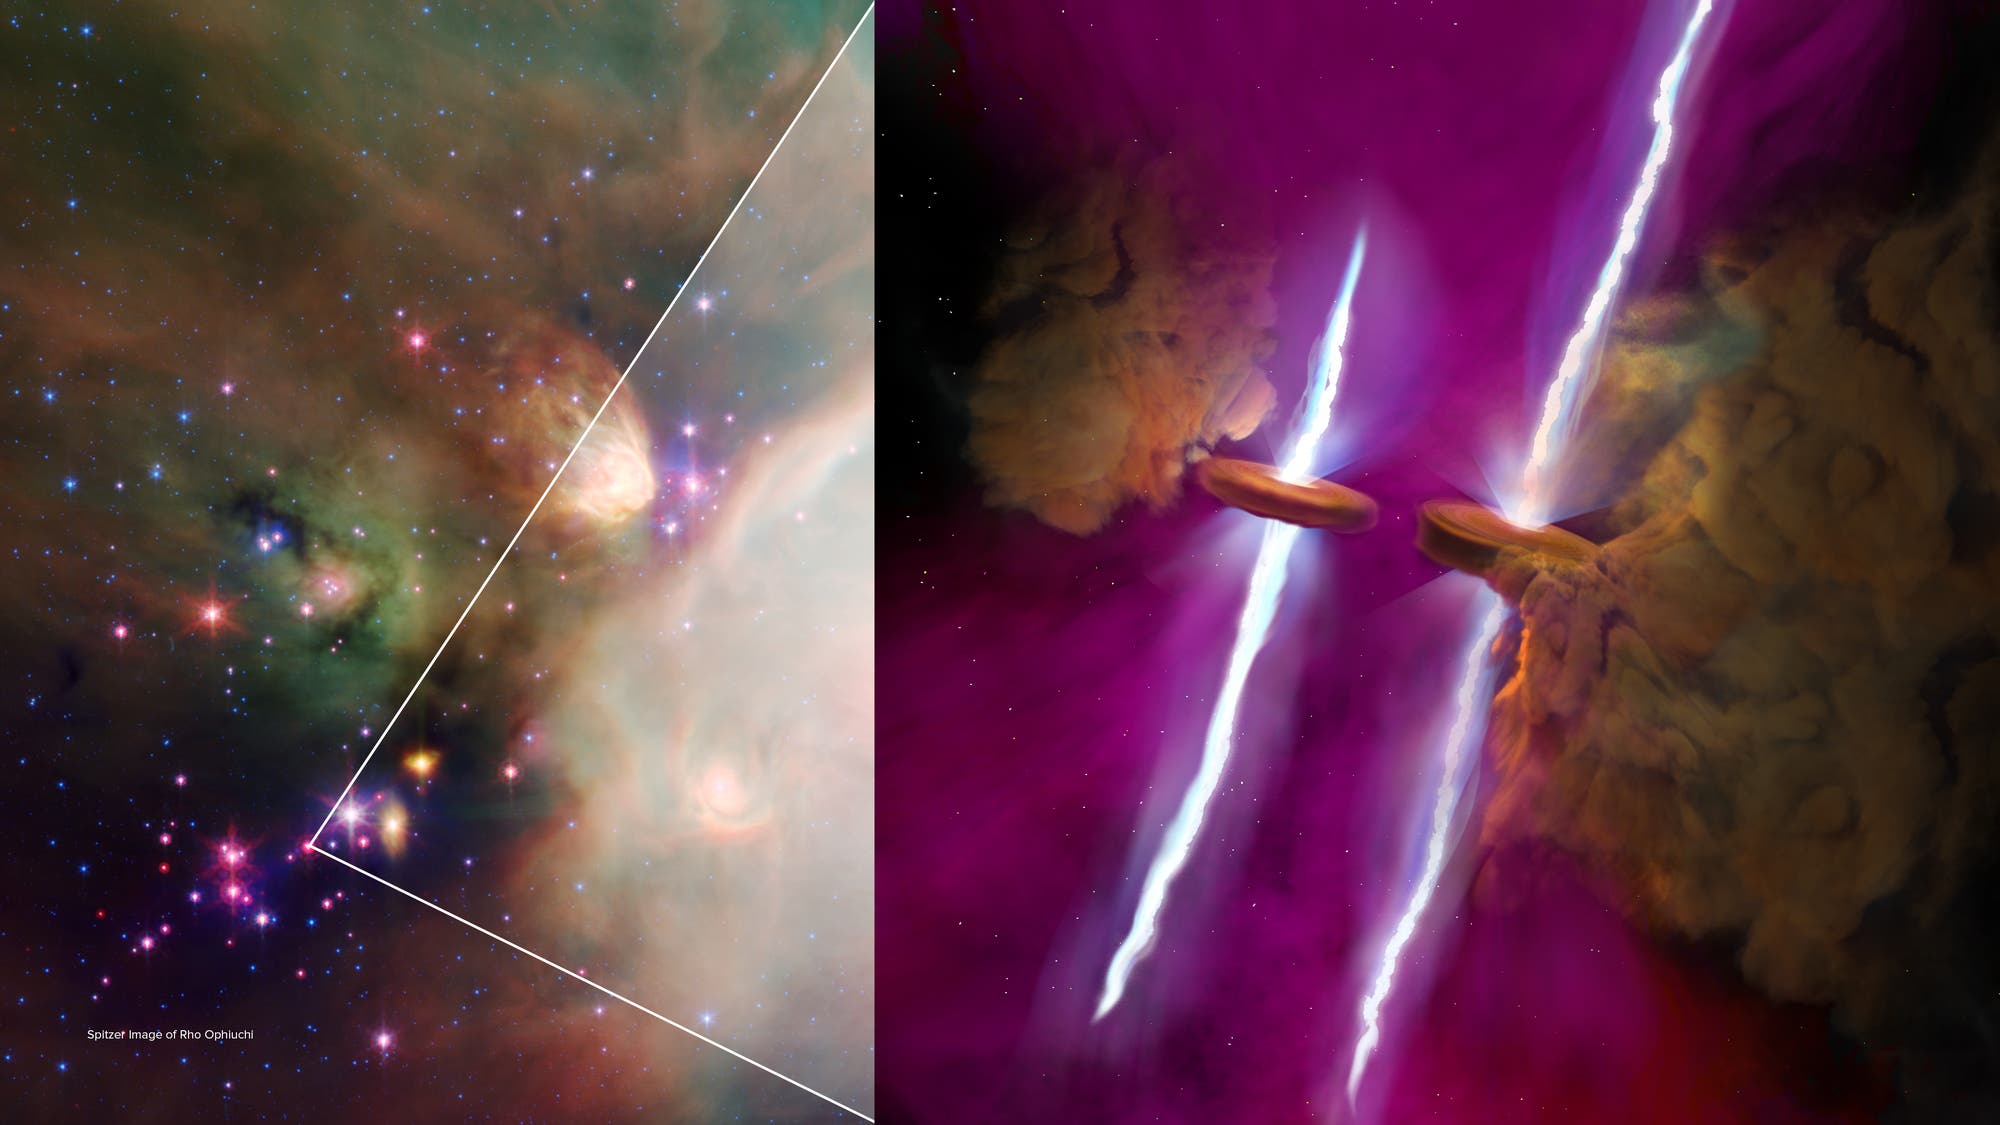 The WL20 system in the constellation Ophiuchus (general image of Rho Ophiuchi and artist's impression)